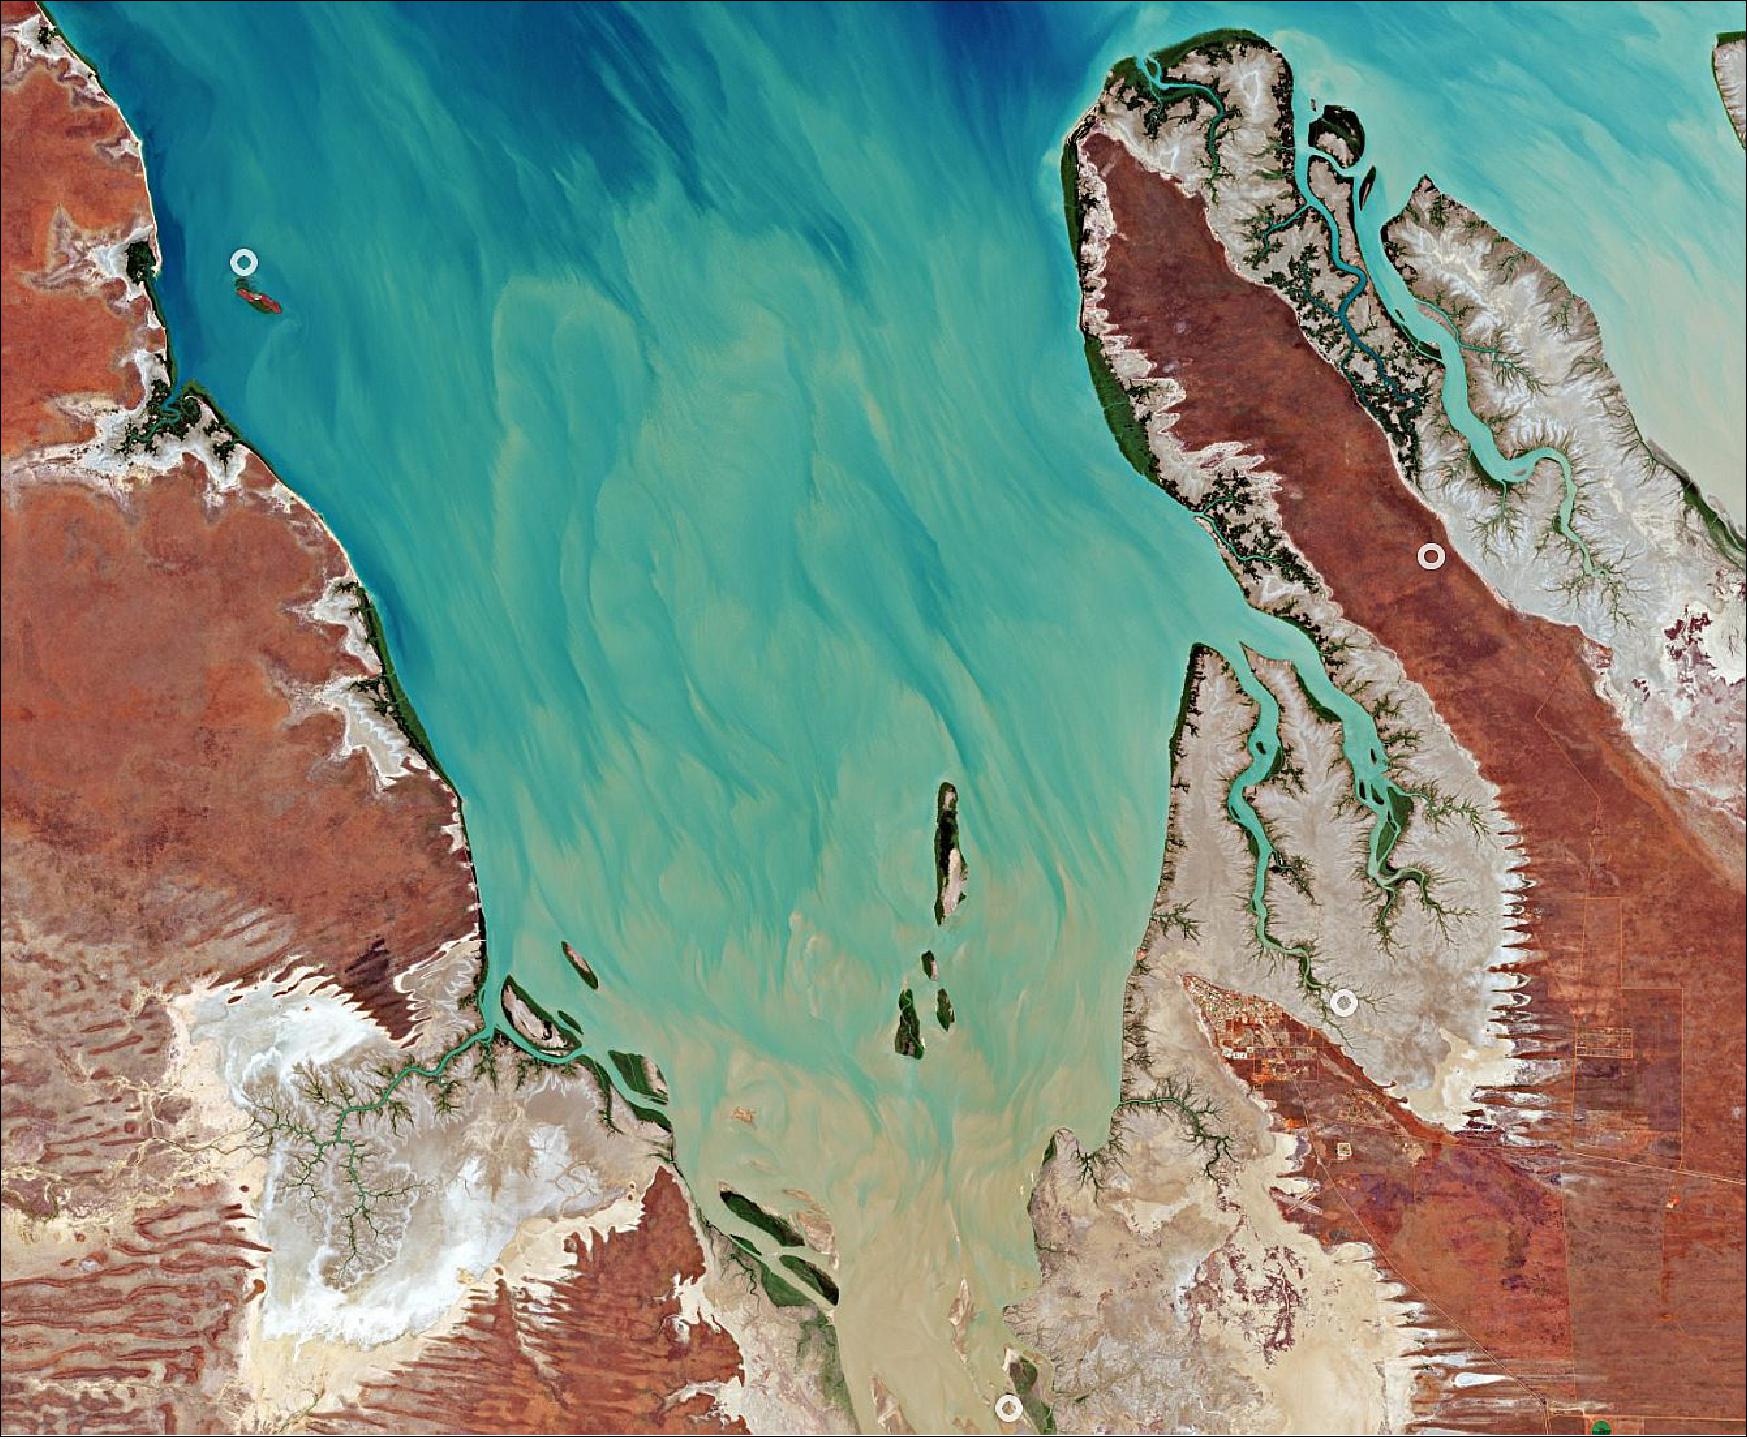 Figure 72: The tiny Valentine Island, visible in the top-left of the image, measures around 1.6 km in length and around 250 m wide. The island is located in the King Sound, a large gulf and inlet of the Indian Ocean in Australia’s Kimberley Region. The gulf is around 120 km long and averages about 50 km in width. This image is also featured on the Earth from Space video program (image credit: ESA, the image contains modified Copernicus Sentinel data (2020), processed by ESA, CC BY-SA 3.0 IGO)